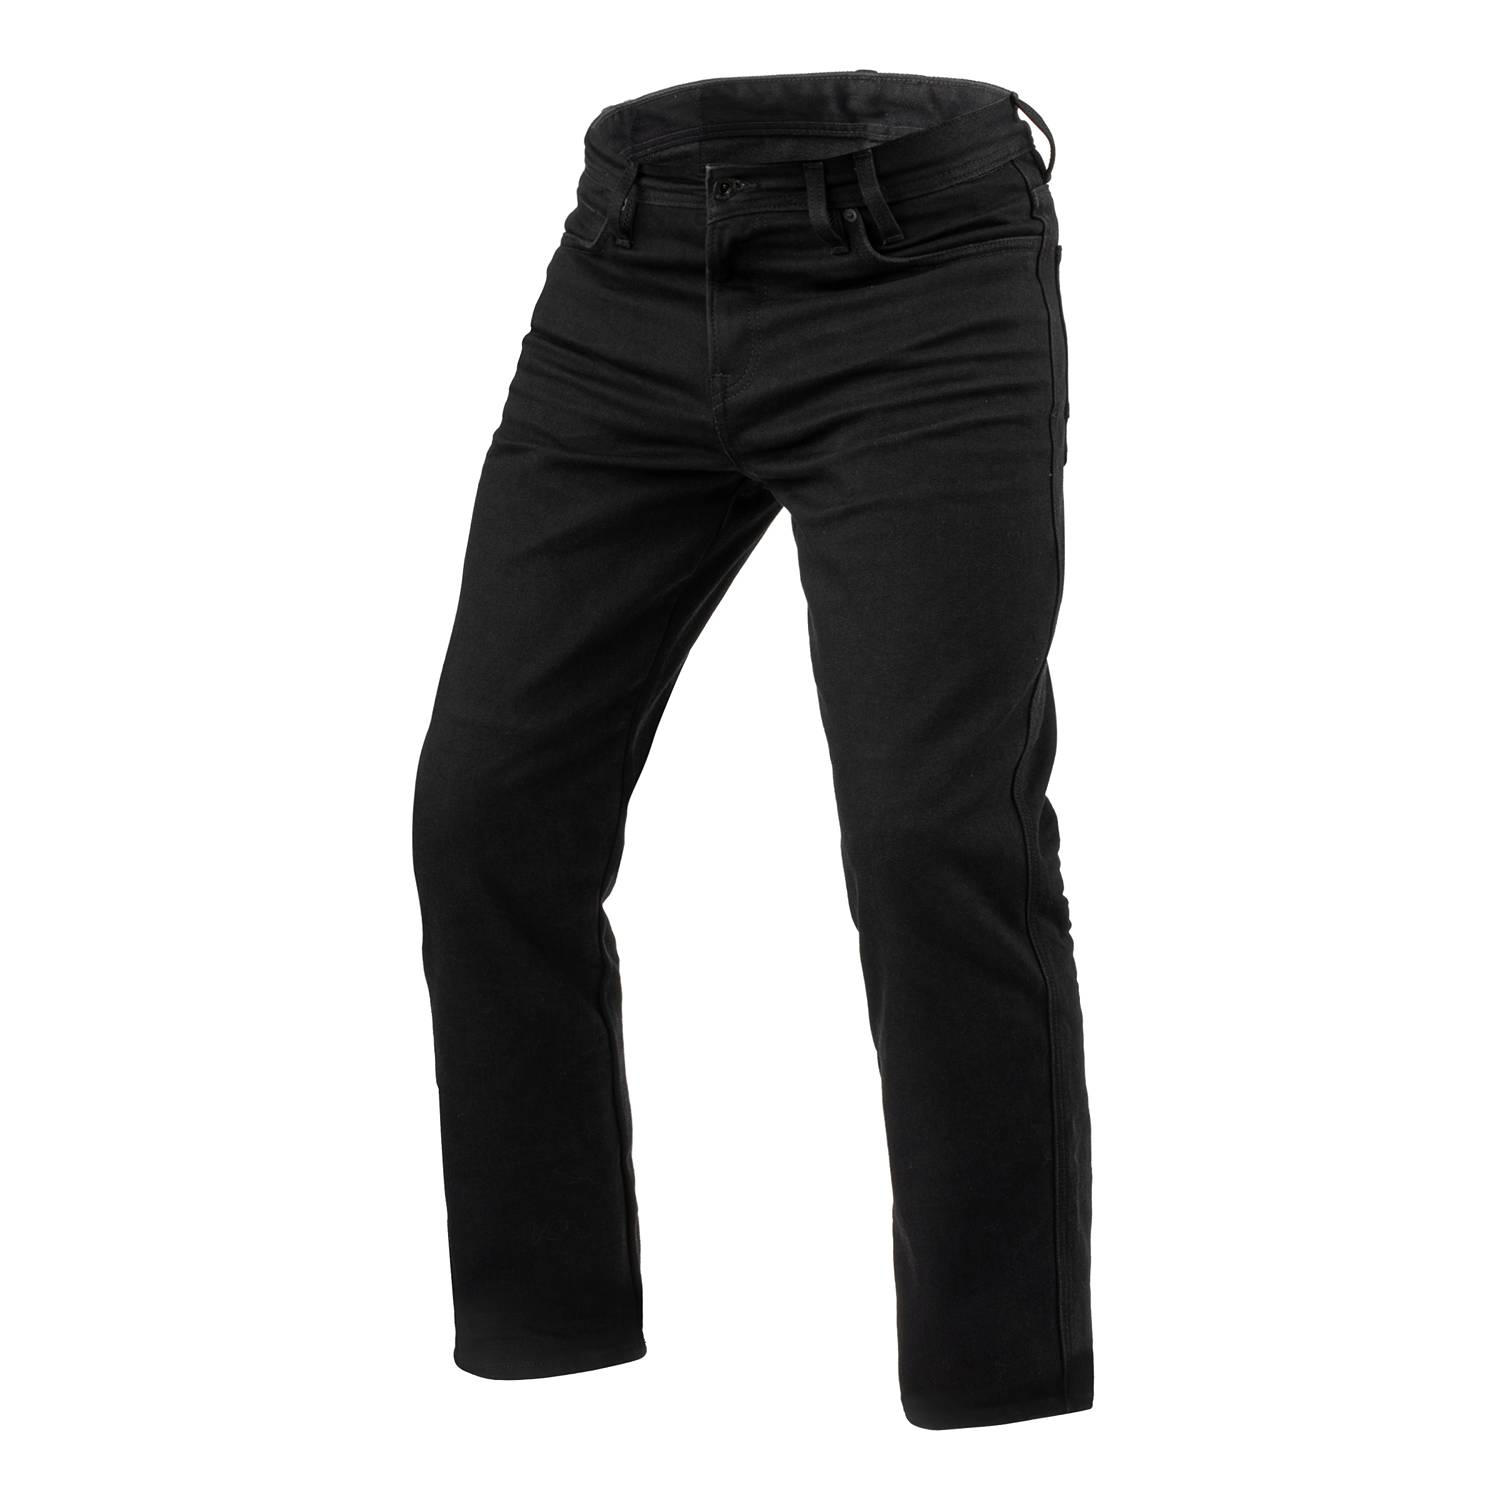 Image of REV'IT! Jeans Lombard 3 RF Black L36 Motorcycle Jeans Size L36/W33 ID 8700001375894